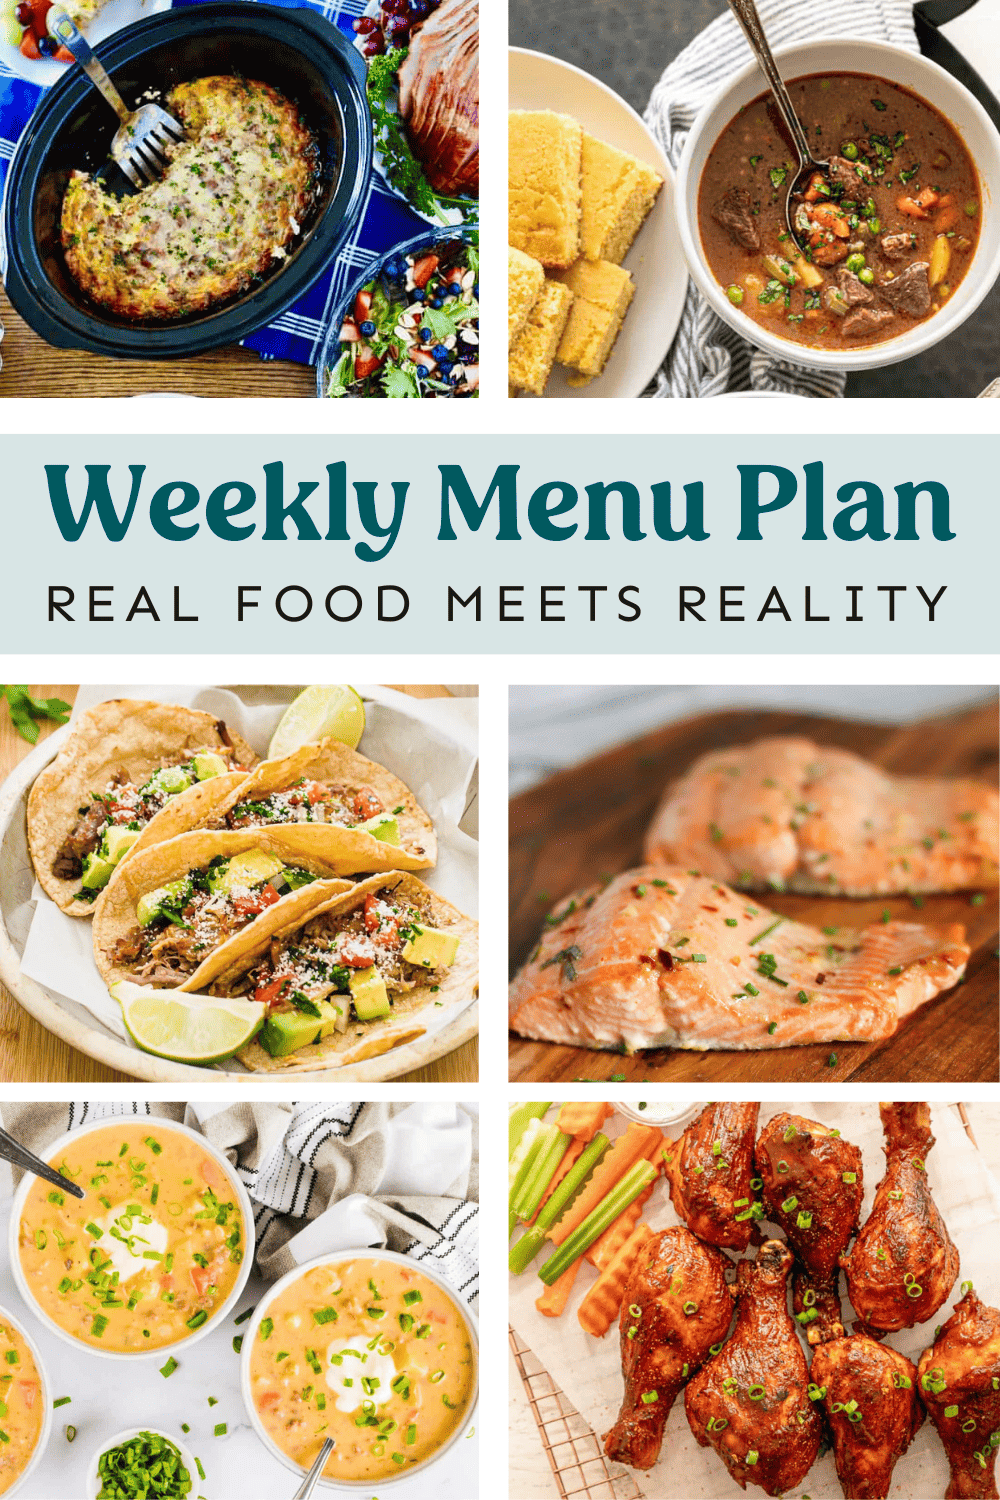 Collage of meal plan recipes.